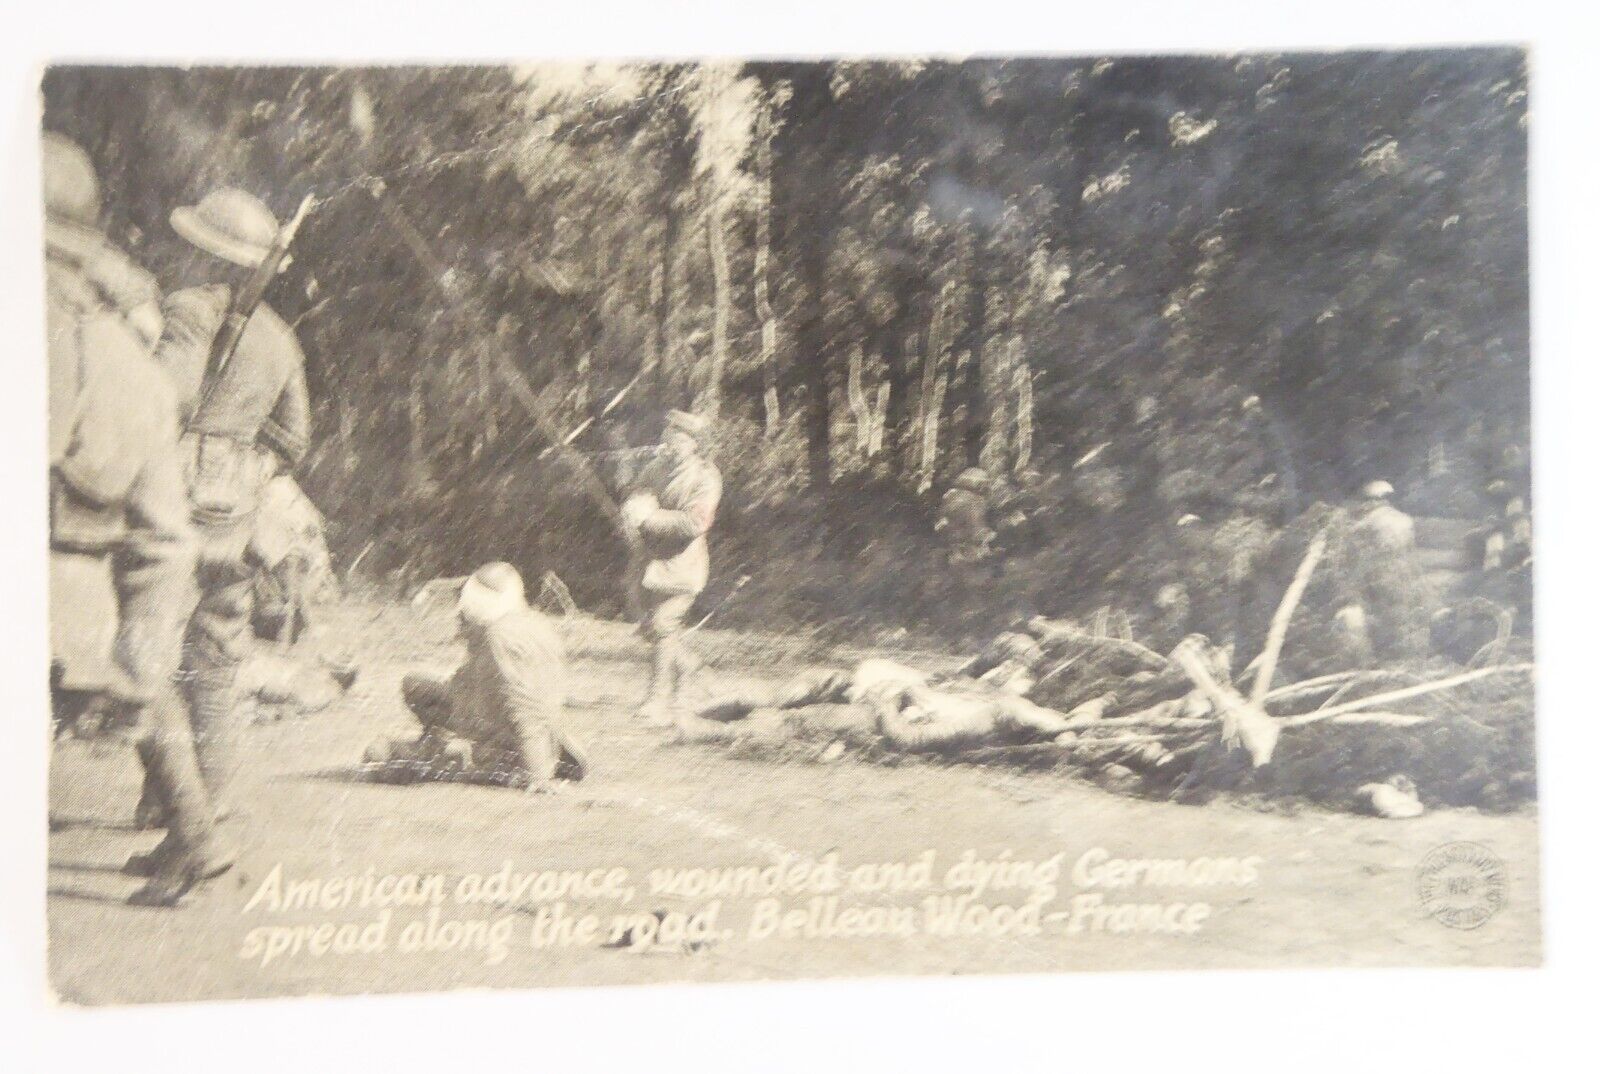 WWI Postcard of American Soldiers Advancing by Wounded German Soldiers in France